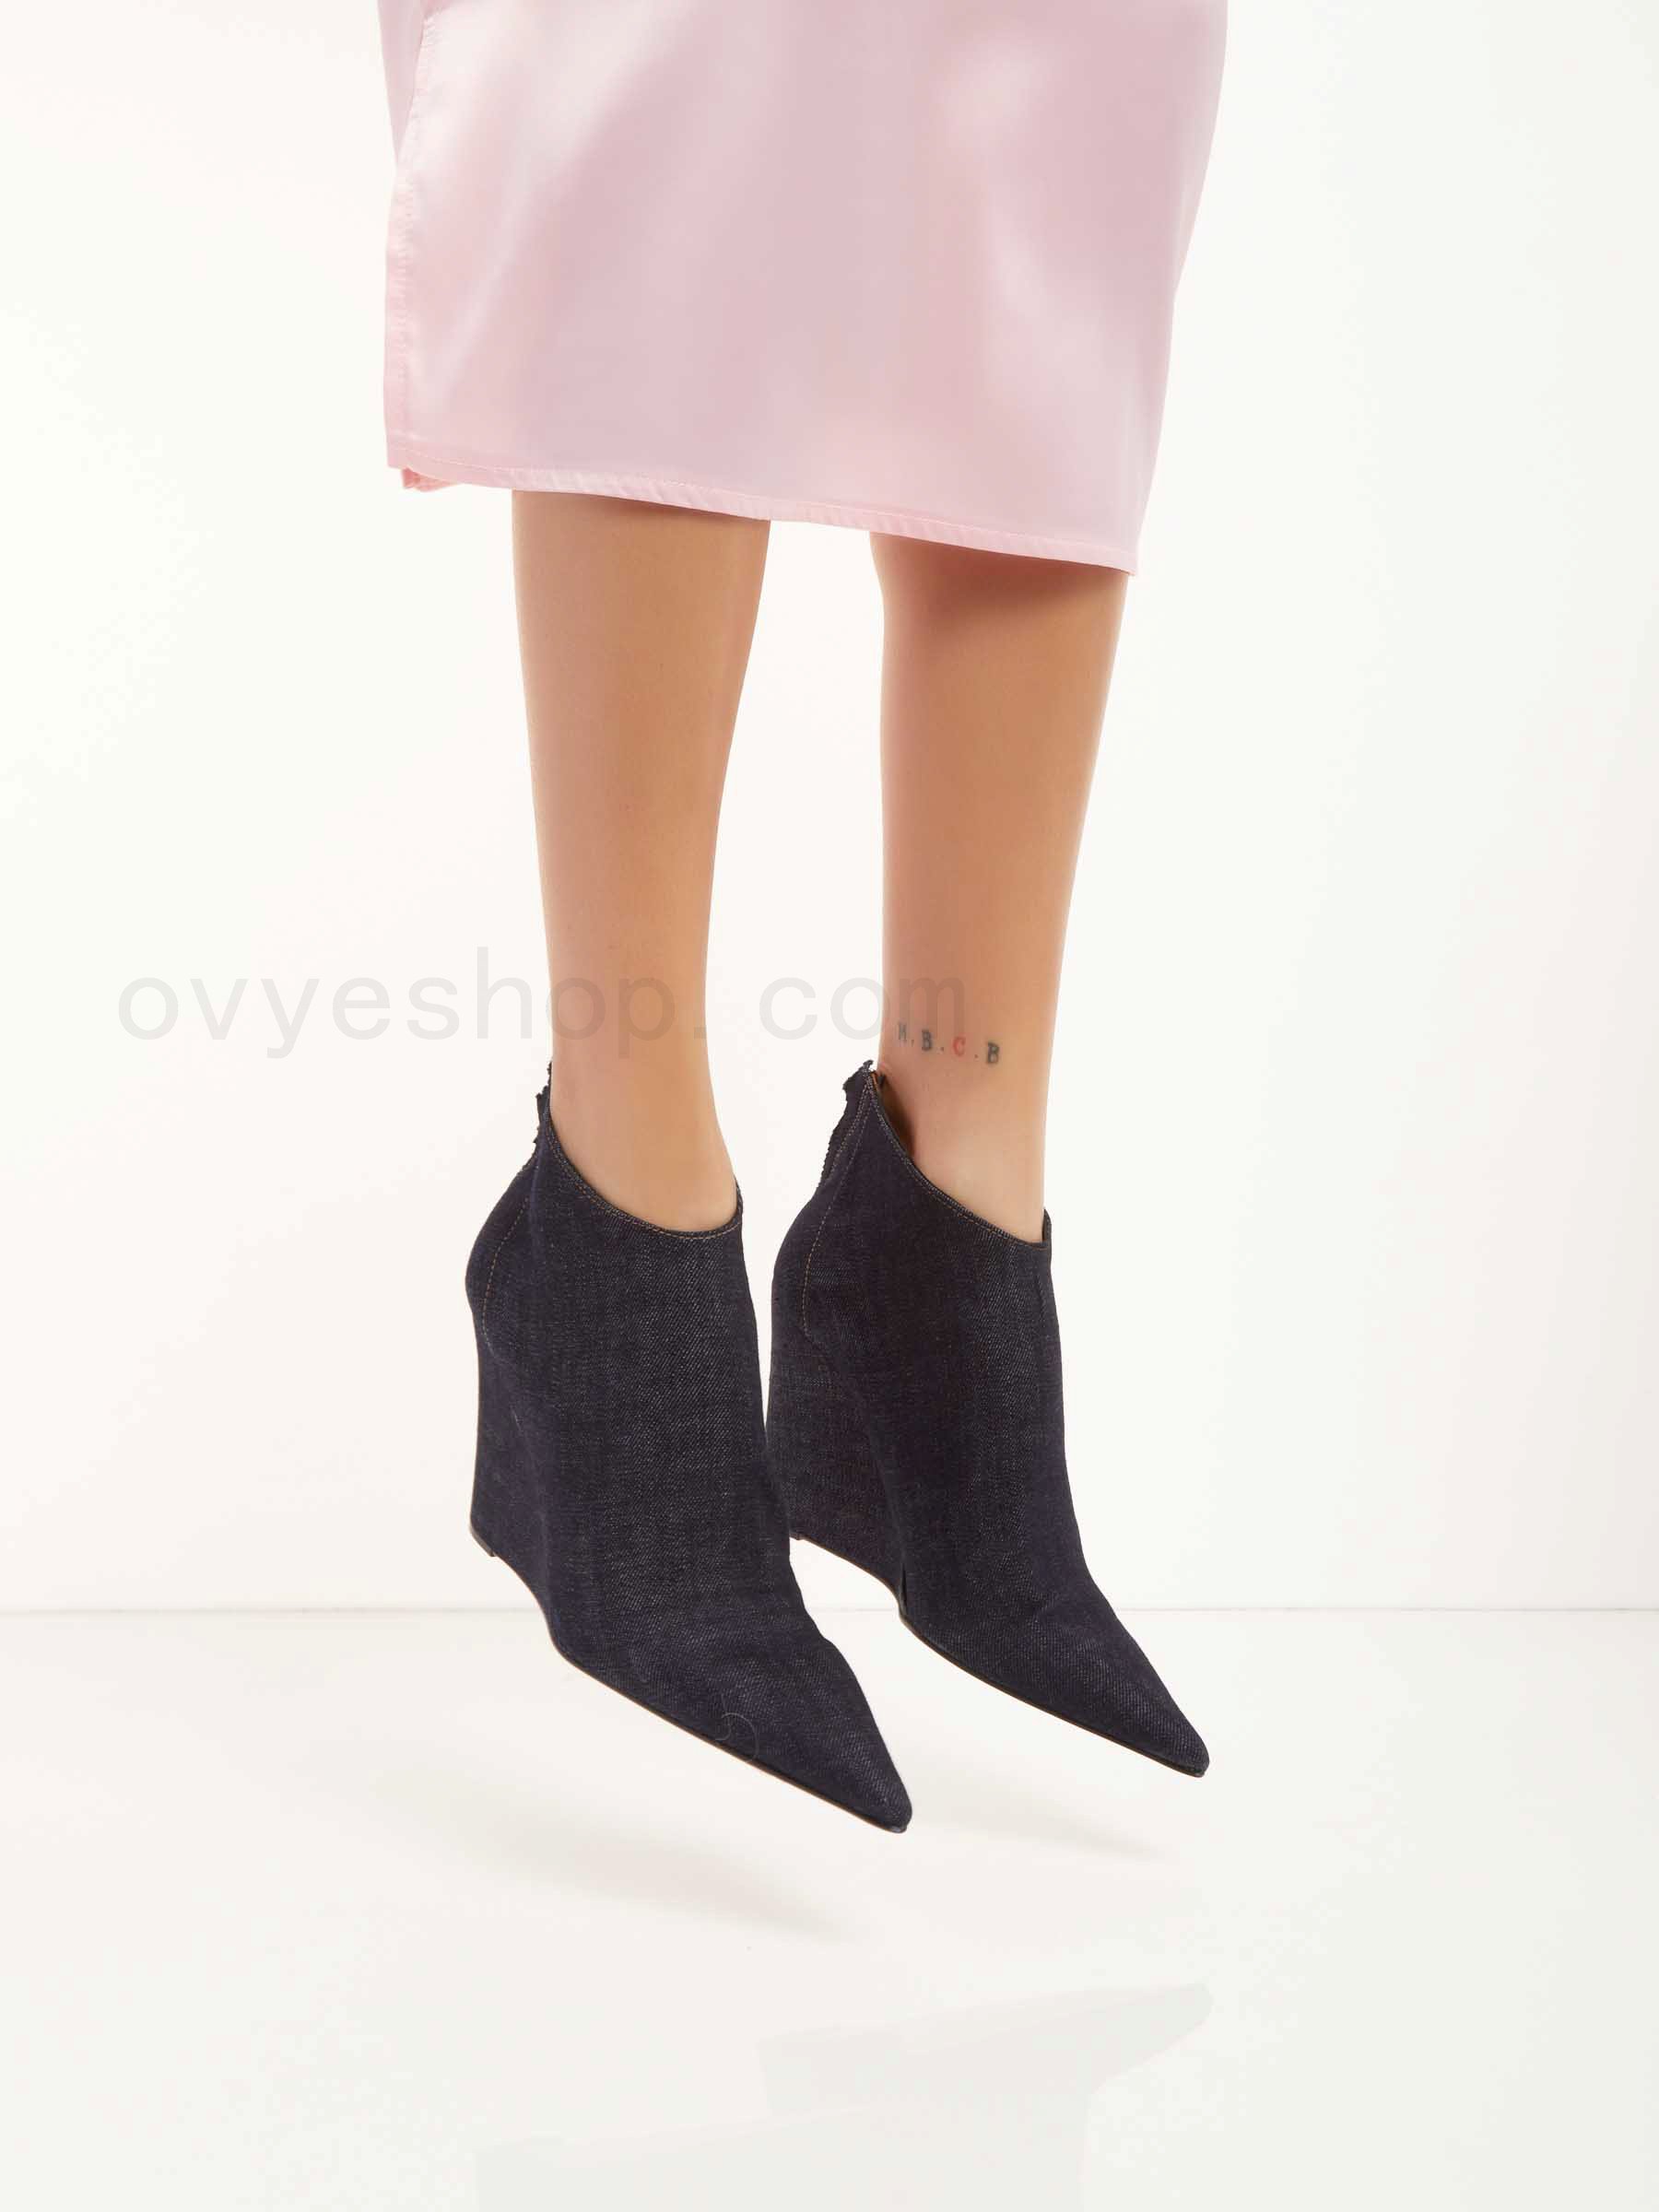 Al 70 Wedge Jeans Ankle Boots F0817885-0471